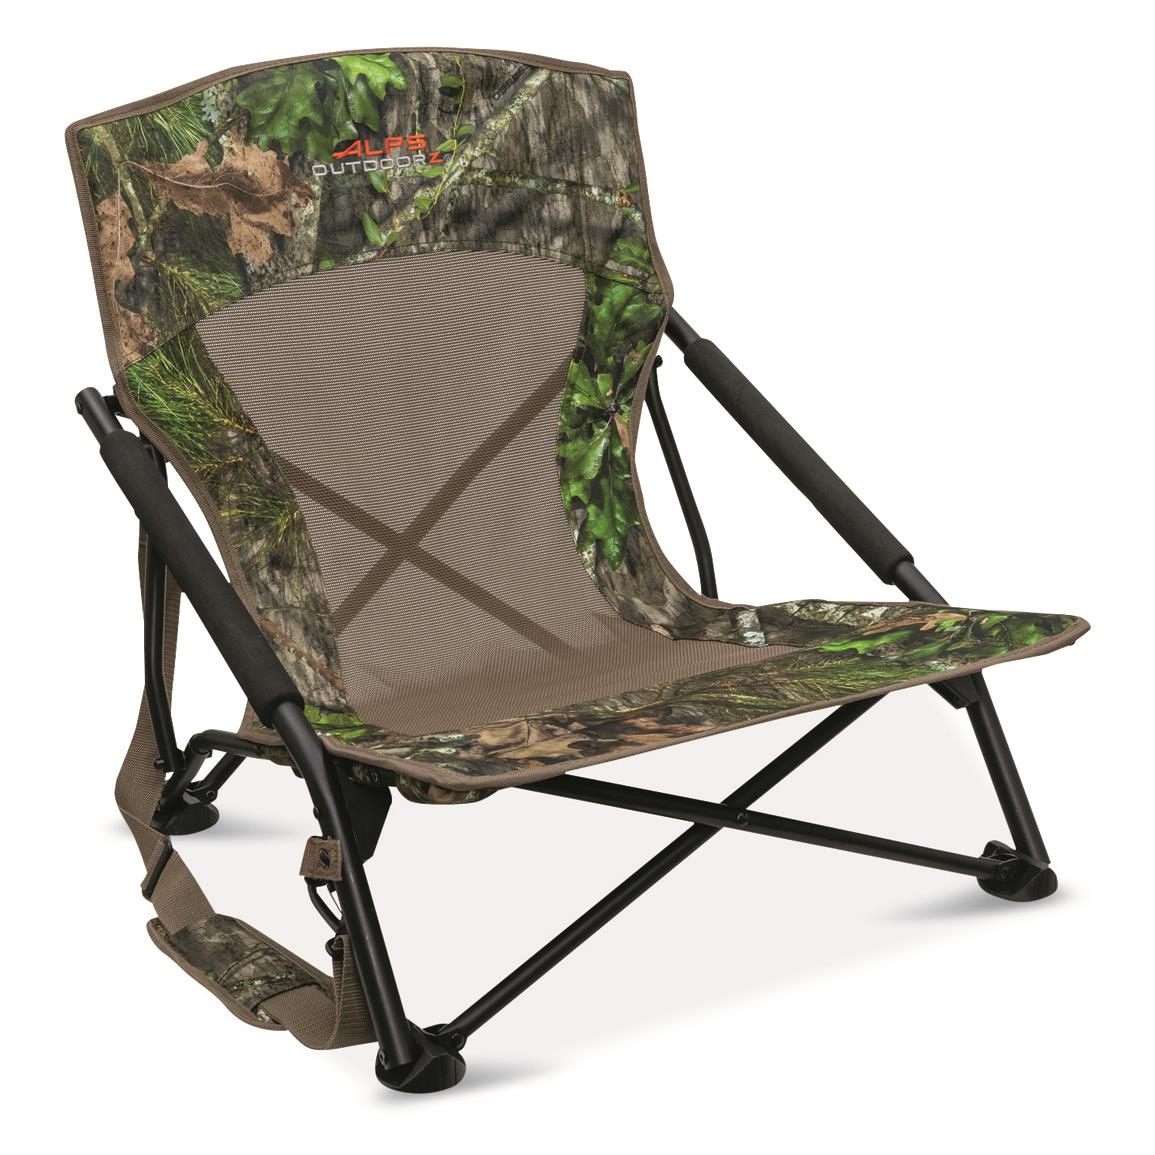 ALPS OutdoorZ Vanish Turkey Chair, Large, Mossy Oak Obsession®